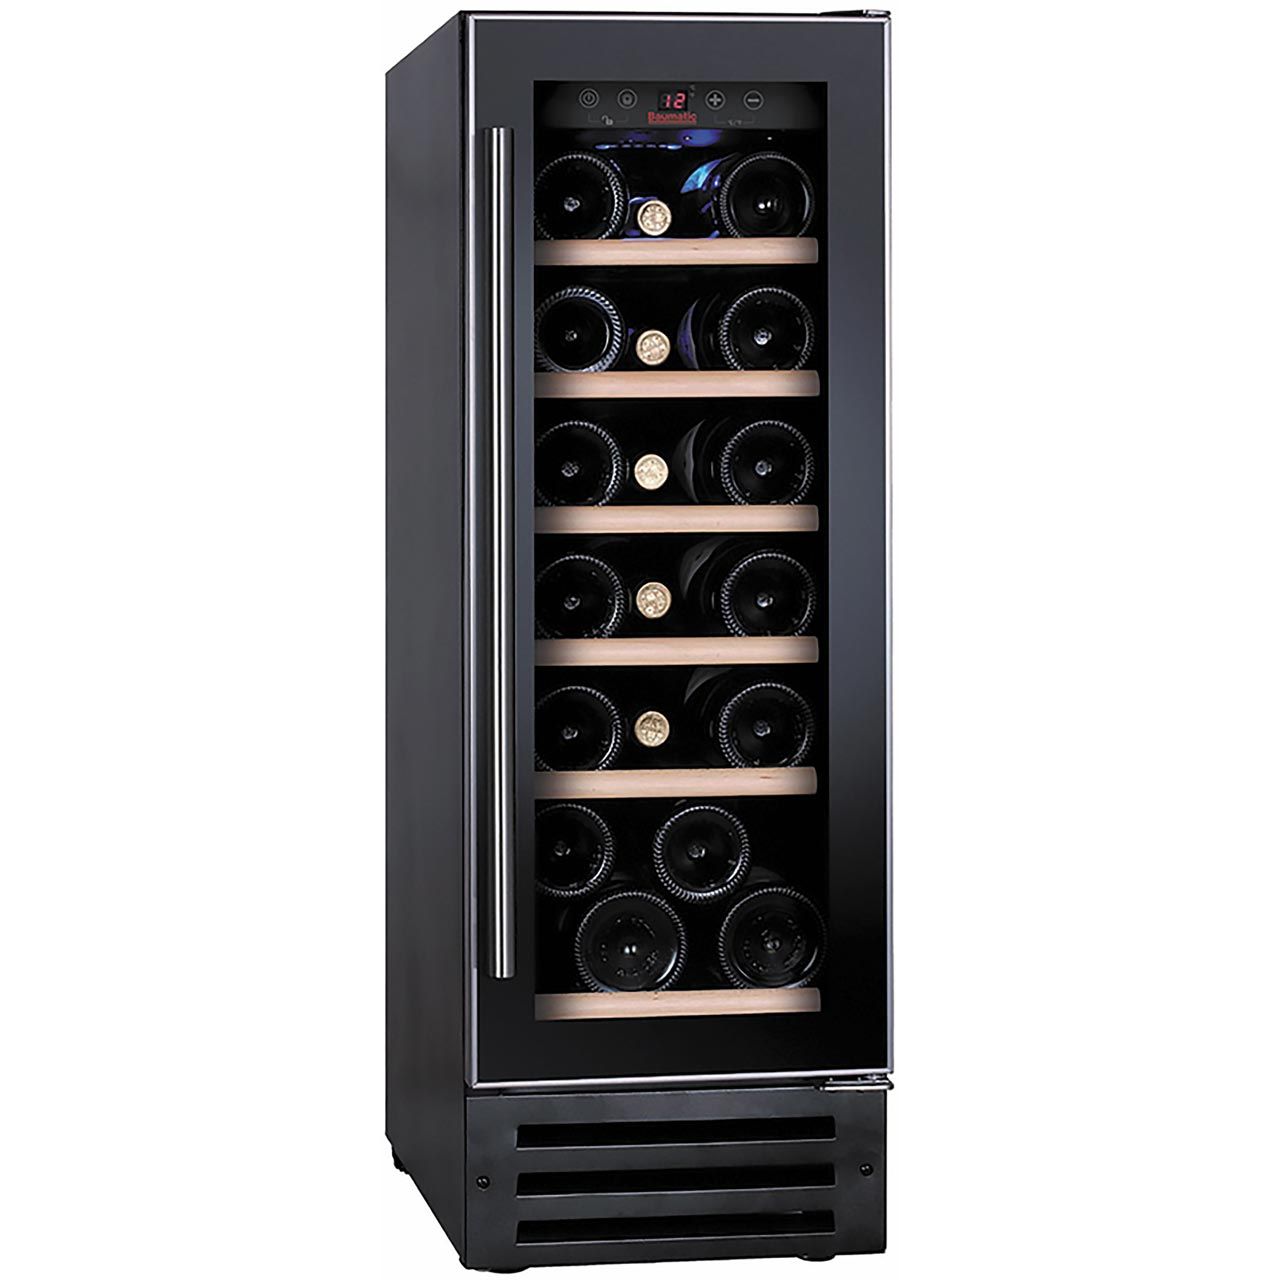 Baumatic BWC305SS/2 Built In Wine Cooler Review